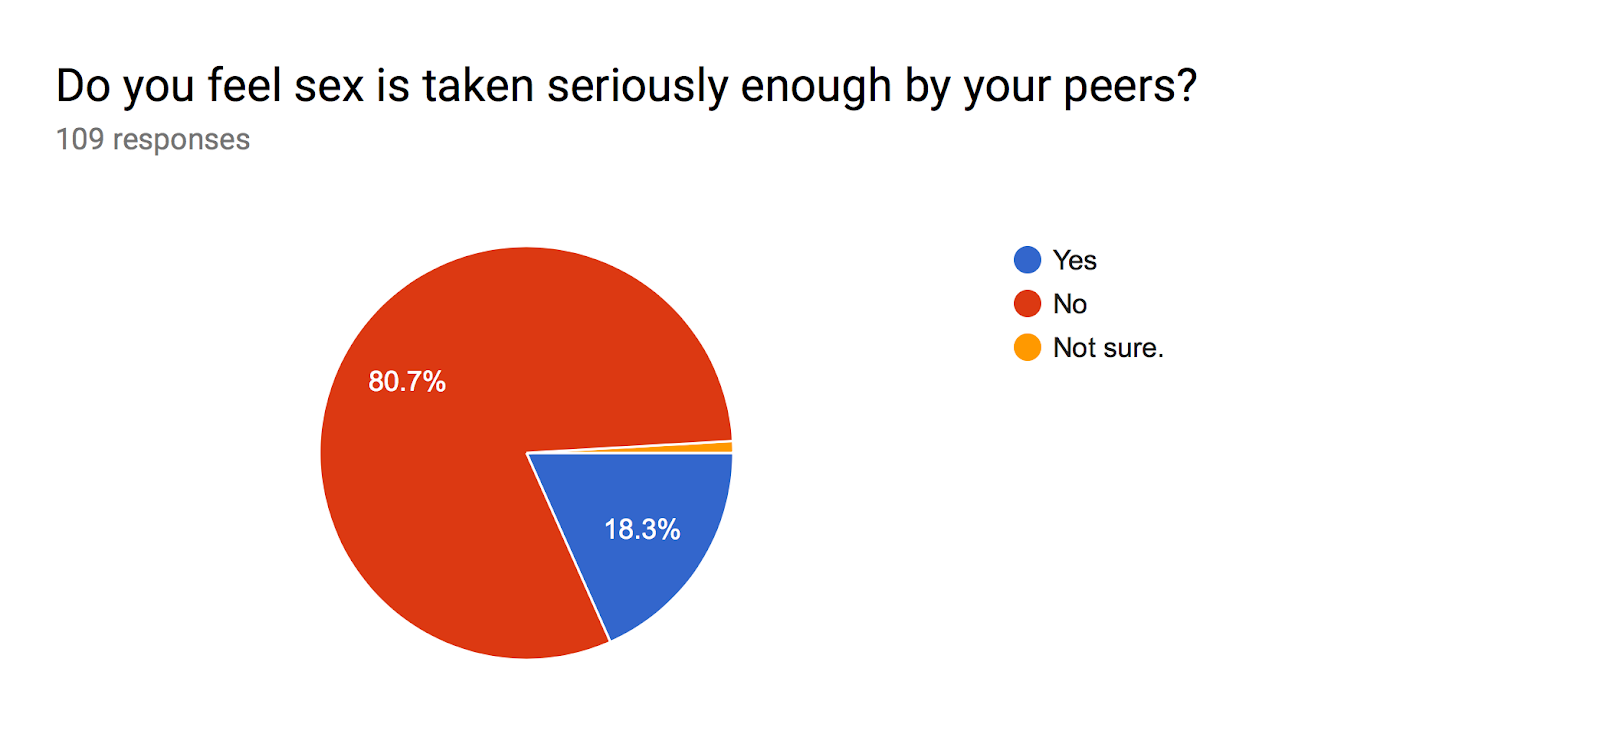 Forms response chart. Question title: Do you feel sex is taken seriously enough by your peers? . Number of responses: 109 responses.